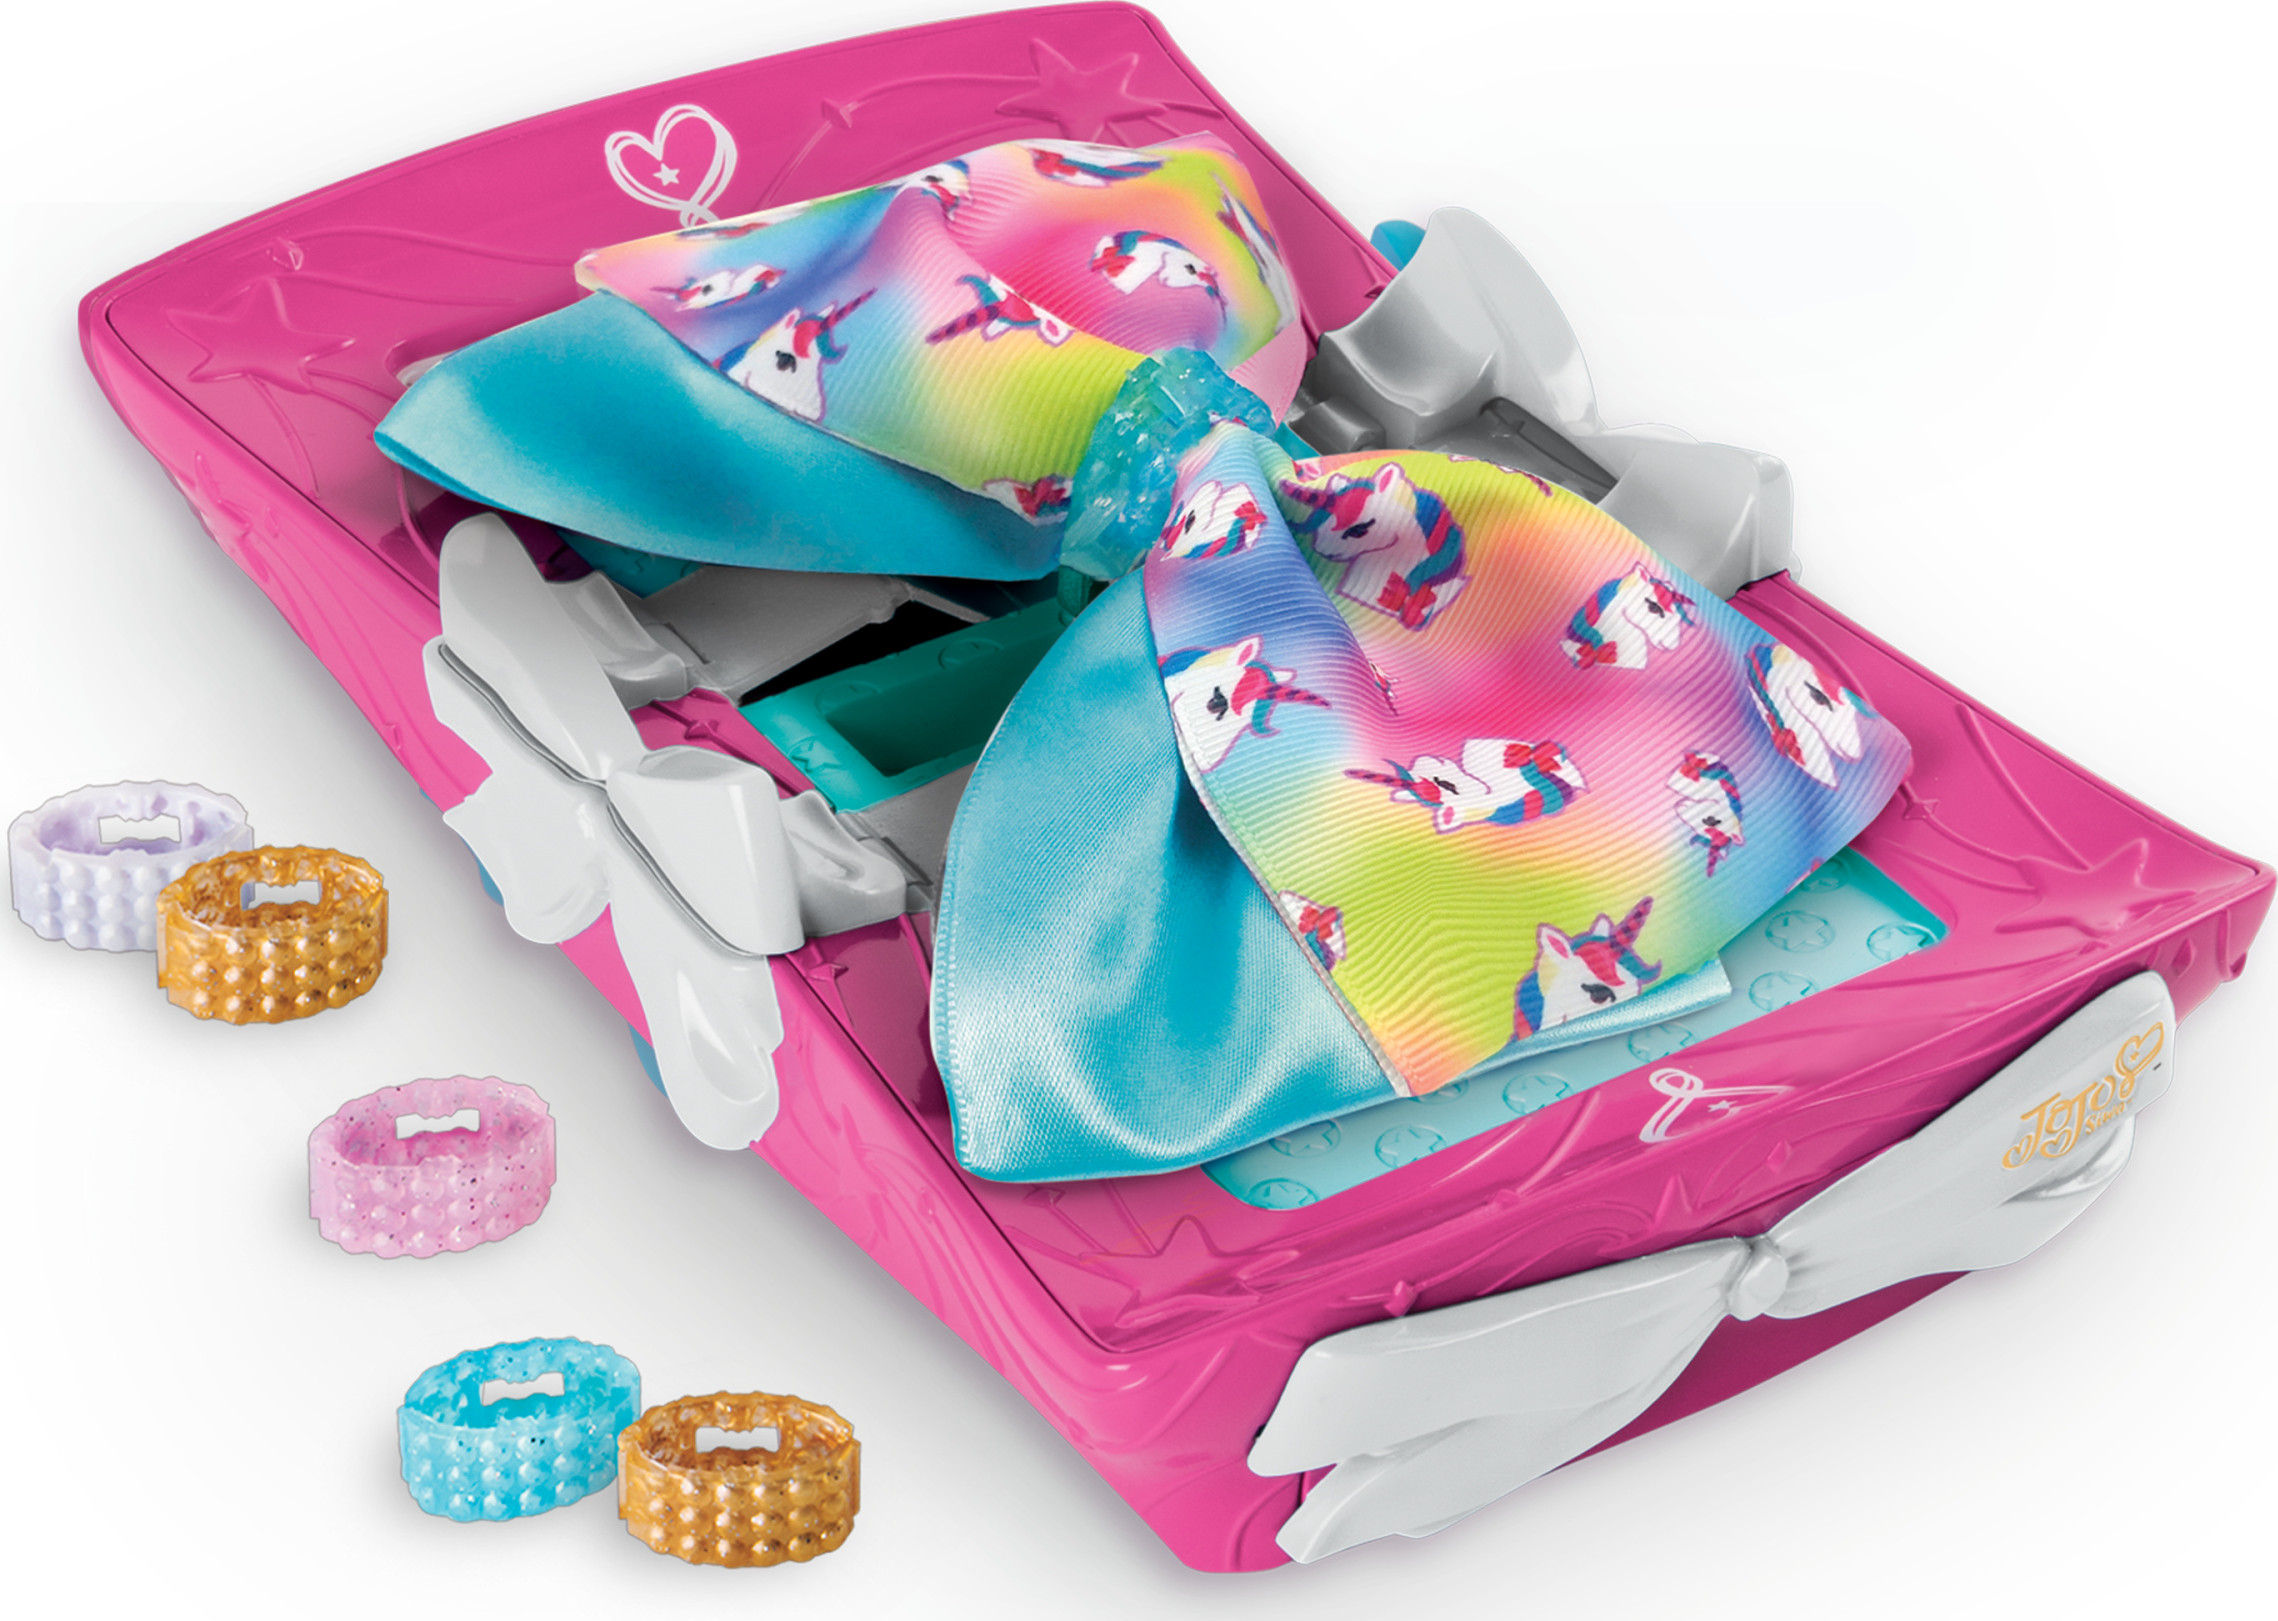 Cool Maker - JoJo Siwa Bow Maker with Rainbow and Unicorn Patterns, for Ages 6 and Up (Edition May Vary) - image 4 of 6